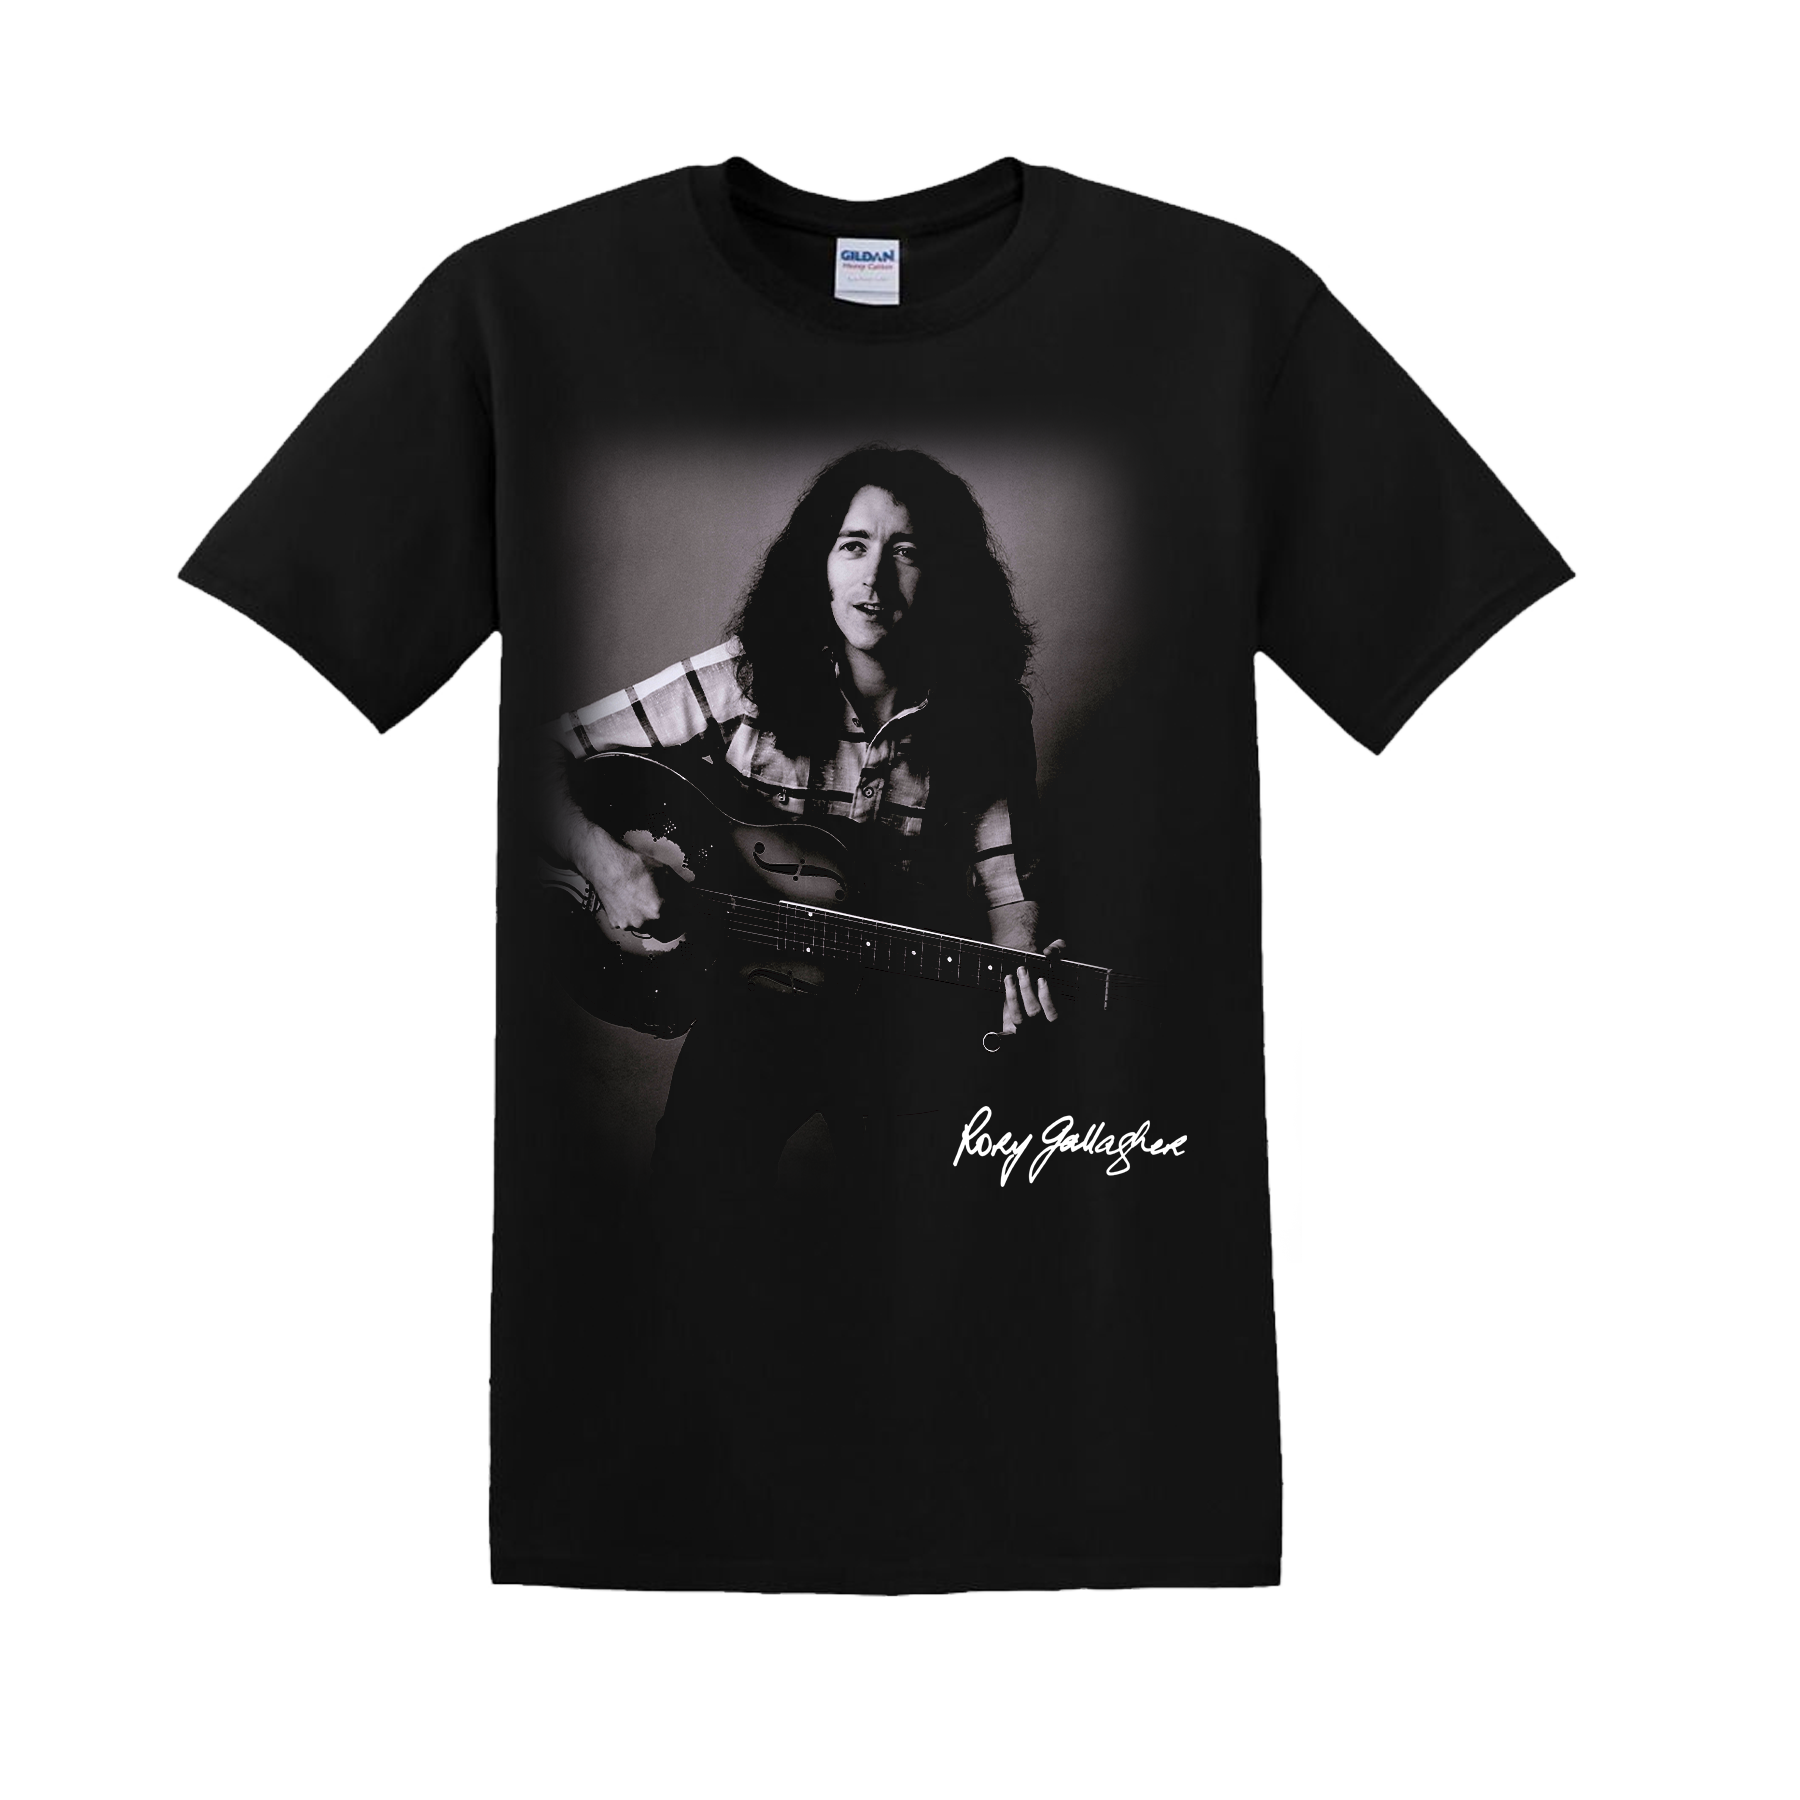 Rory Gallagher - Official Rory Gallagher portrait tee, based on 1977 photo by John Prew